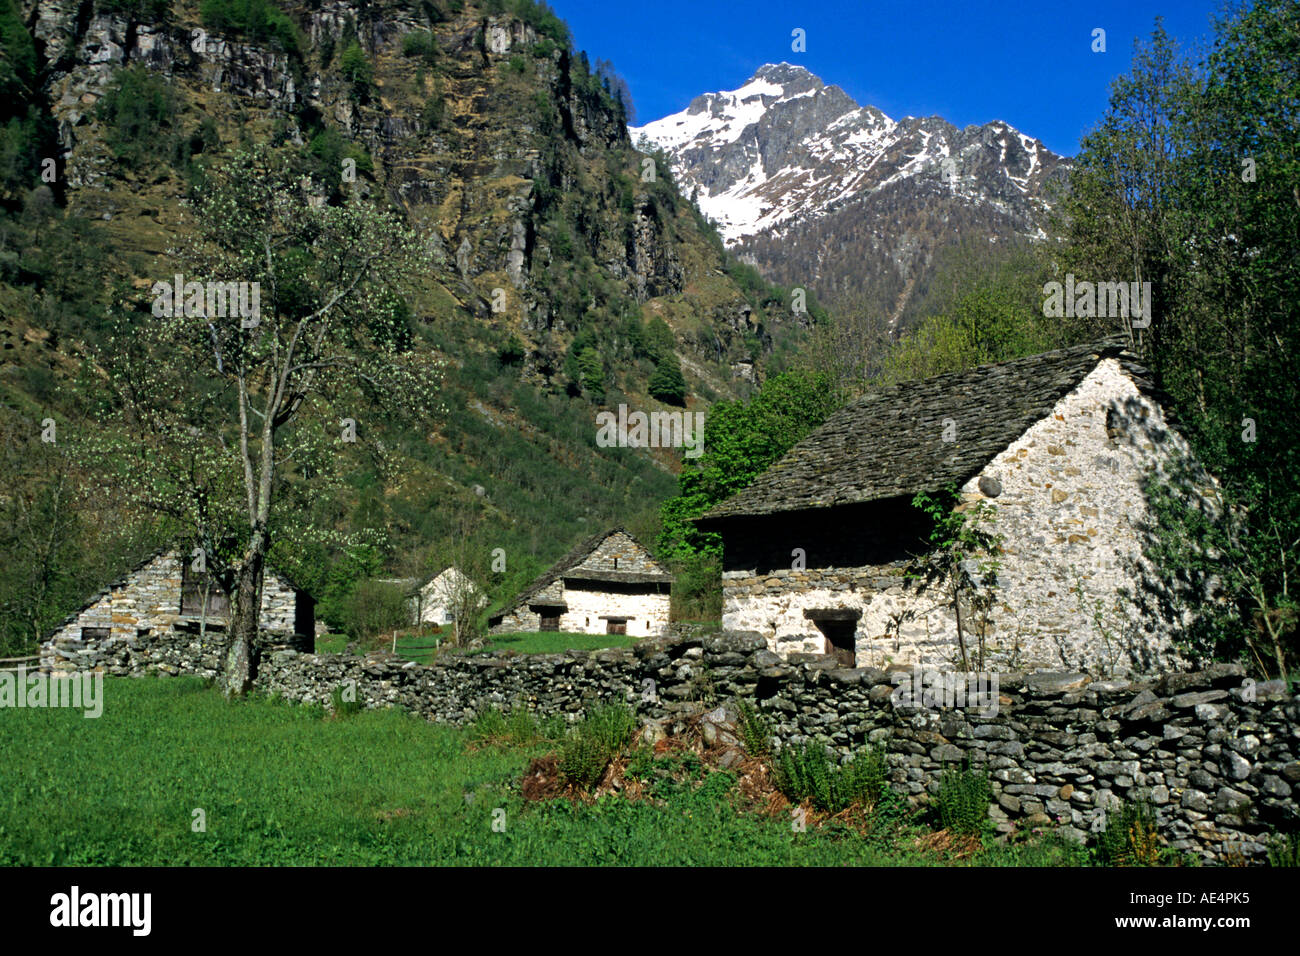 A stone farmhouse stands in a valley near the village of Sonogno in the Swiss Alps of Ticino. Stock Photo